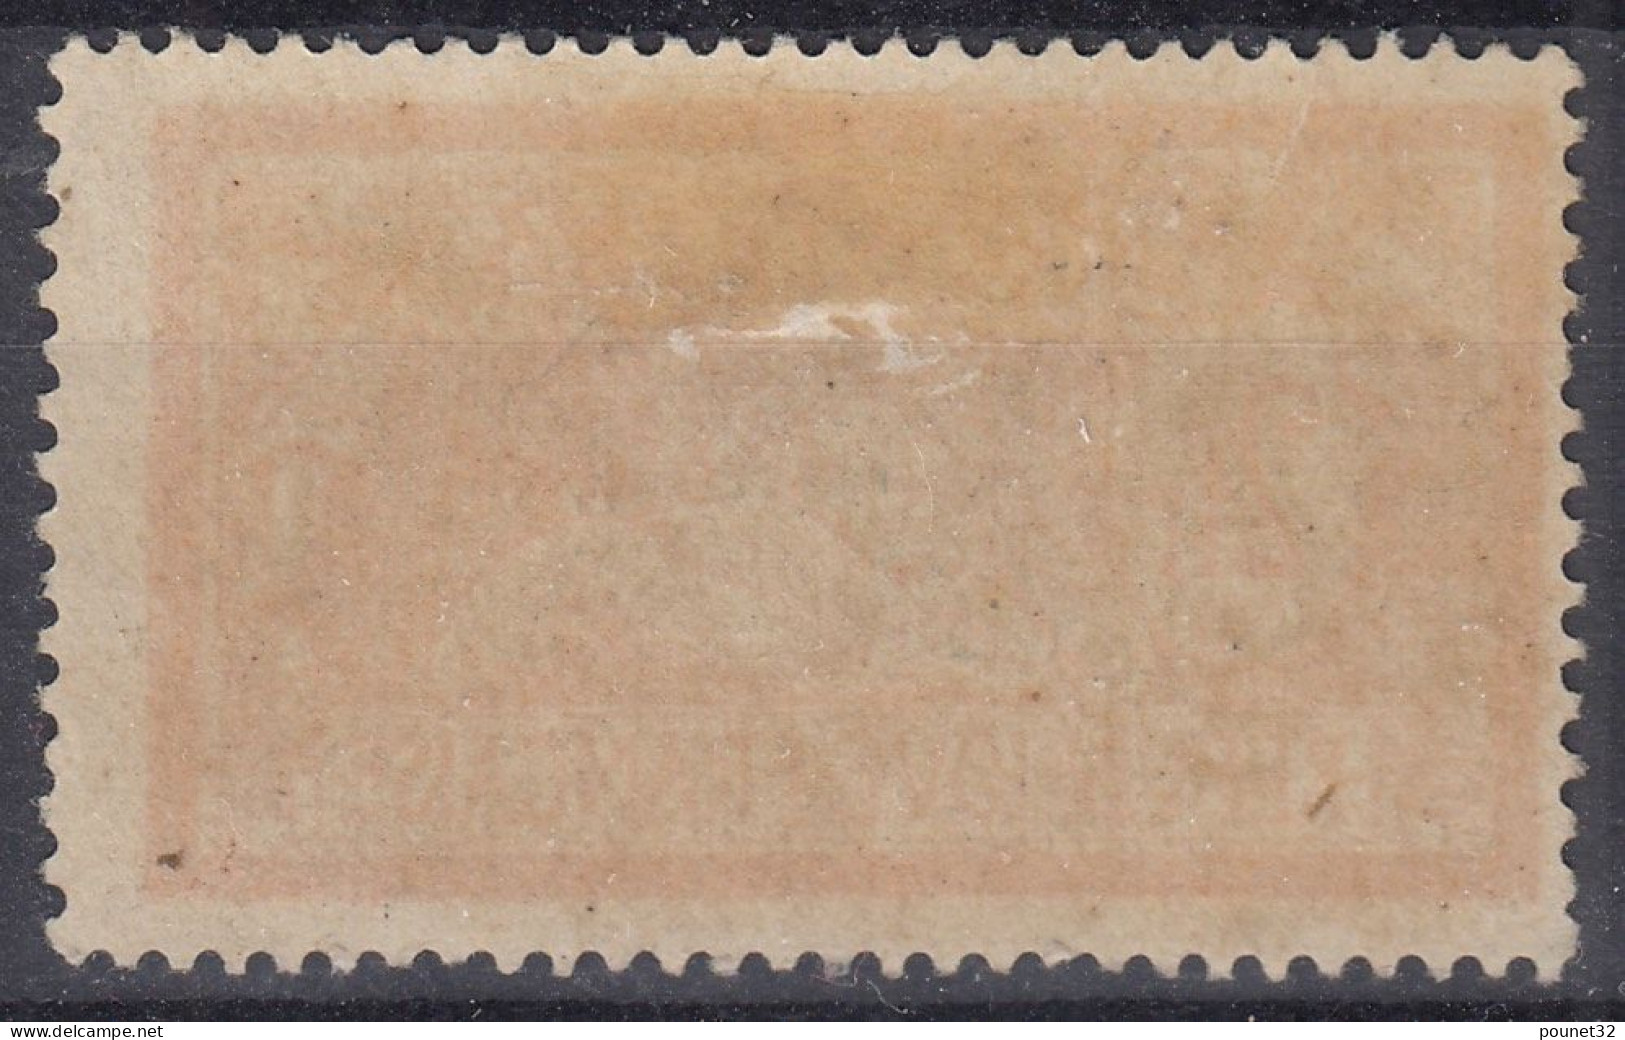 TIMBRE FRANCE MERSON N° 145 NEUF * GOMME AVEC CHARNIERE - COTE 55 € - 1900-27 Merson